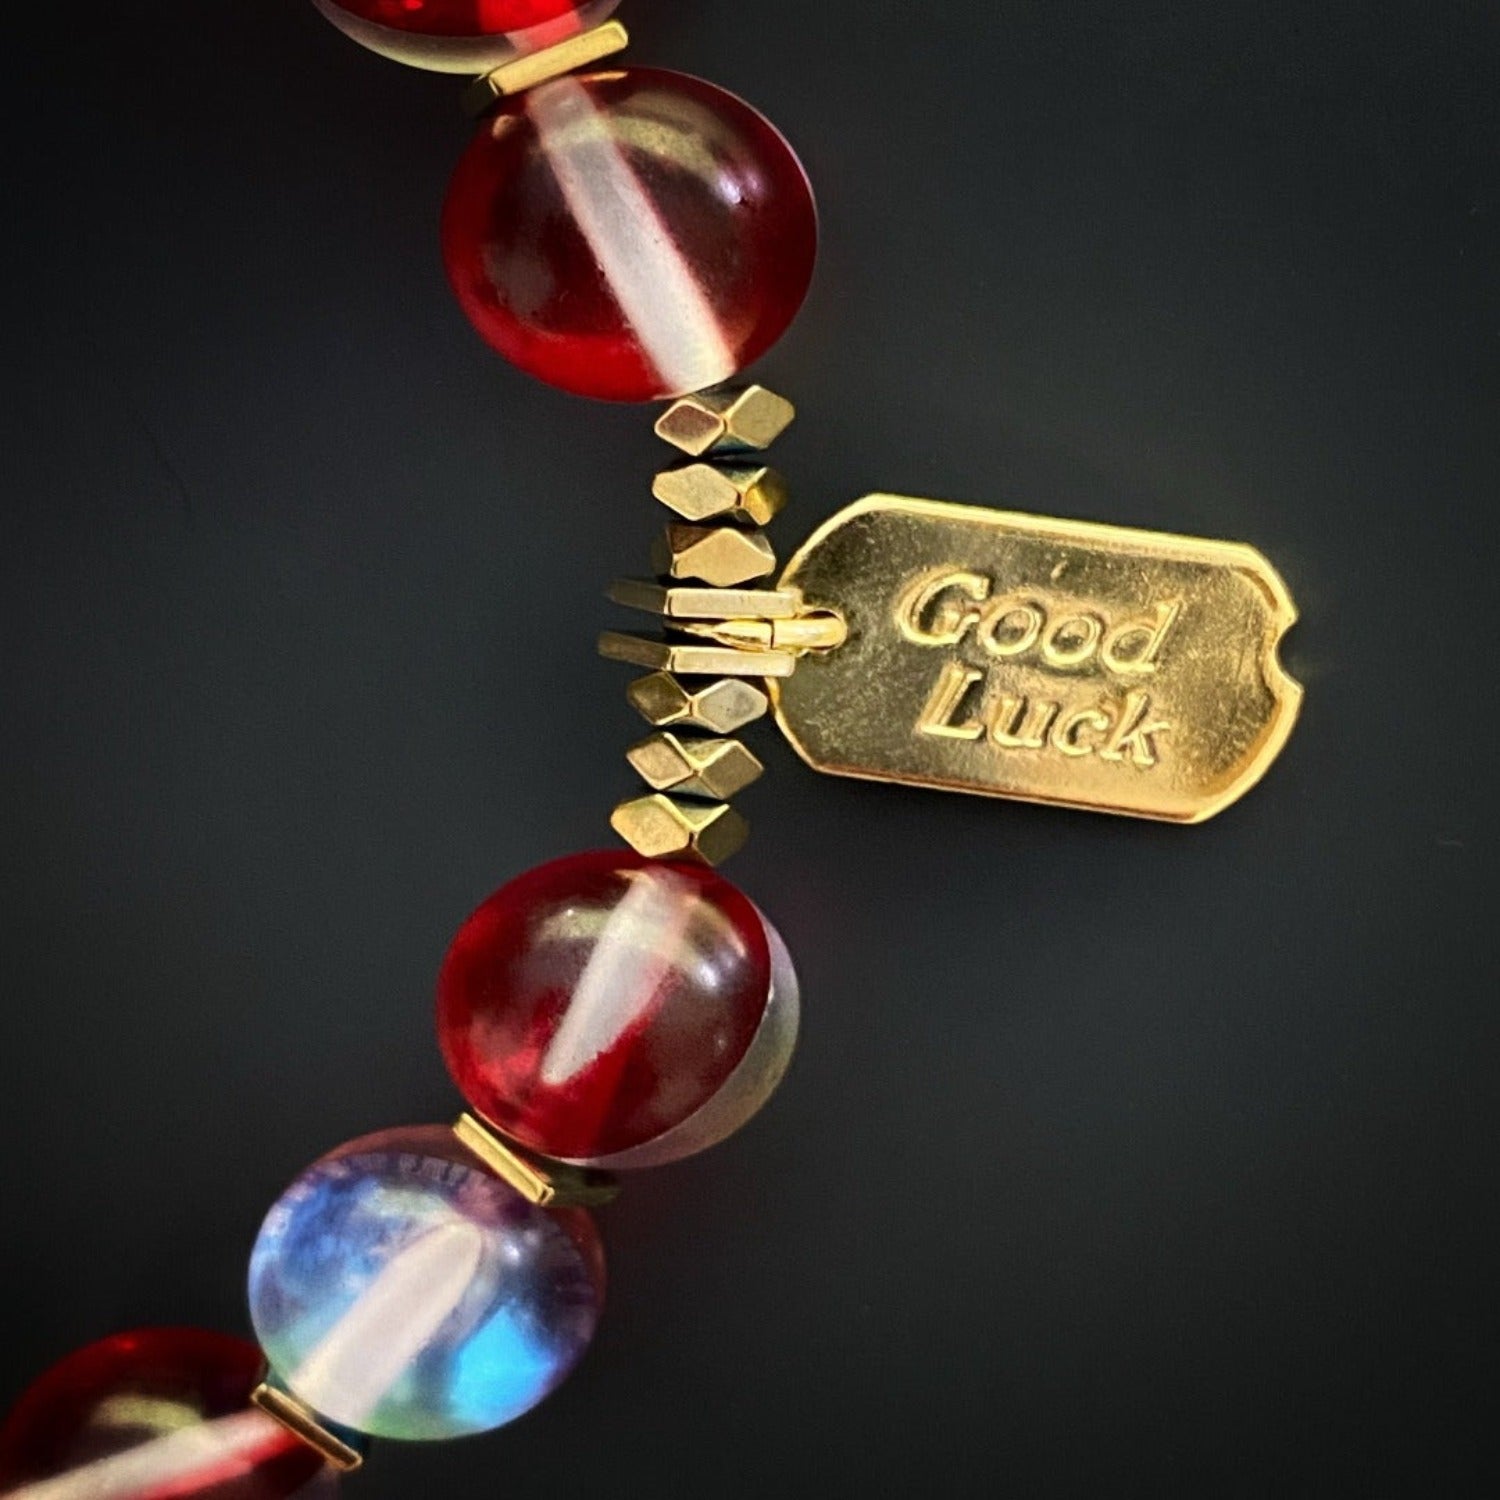 Admire the unique craftsmanship of the Red &amp; Gold Good Luck Bracelet, showcasing its intricate details and captivating design.